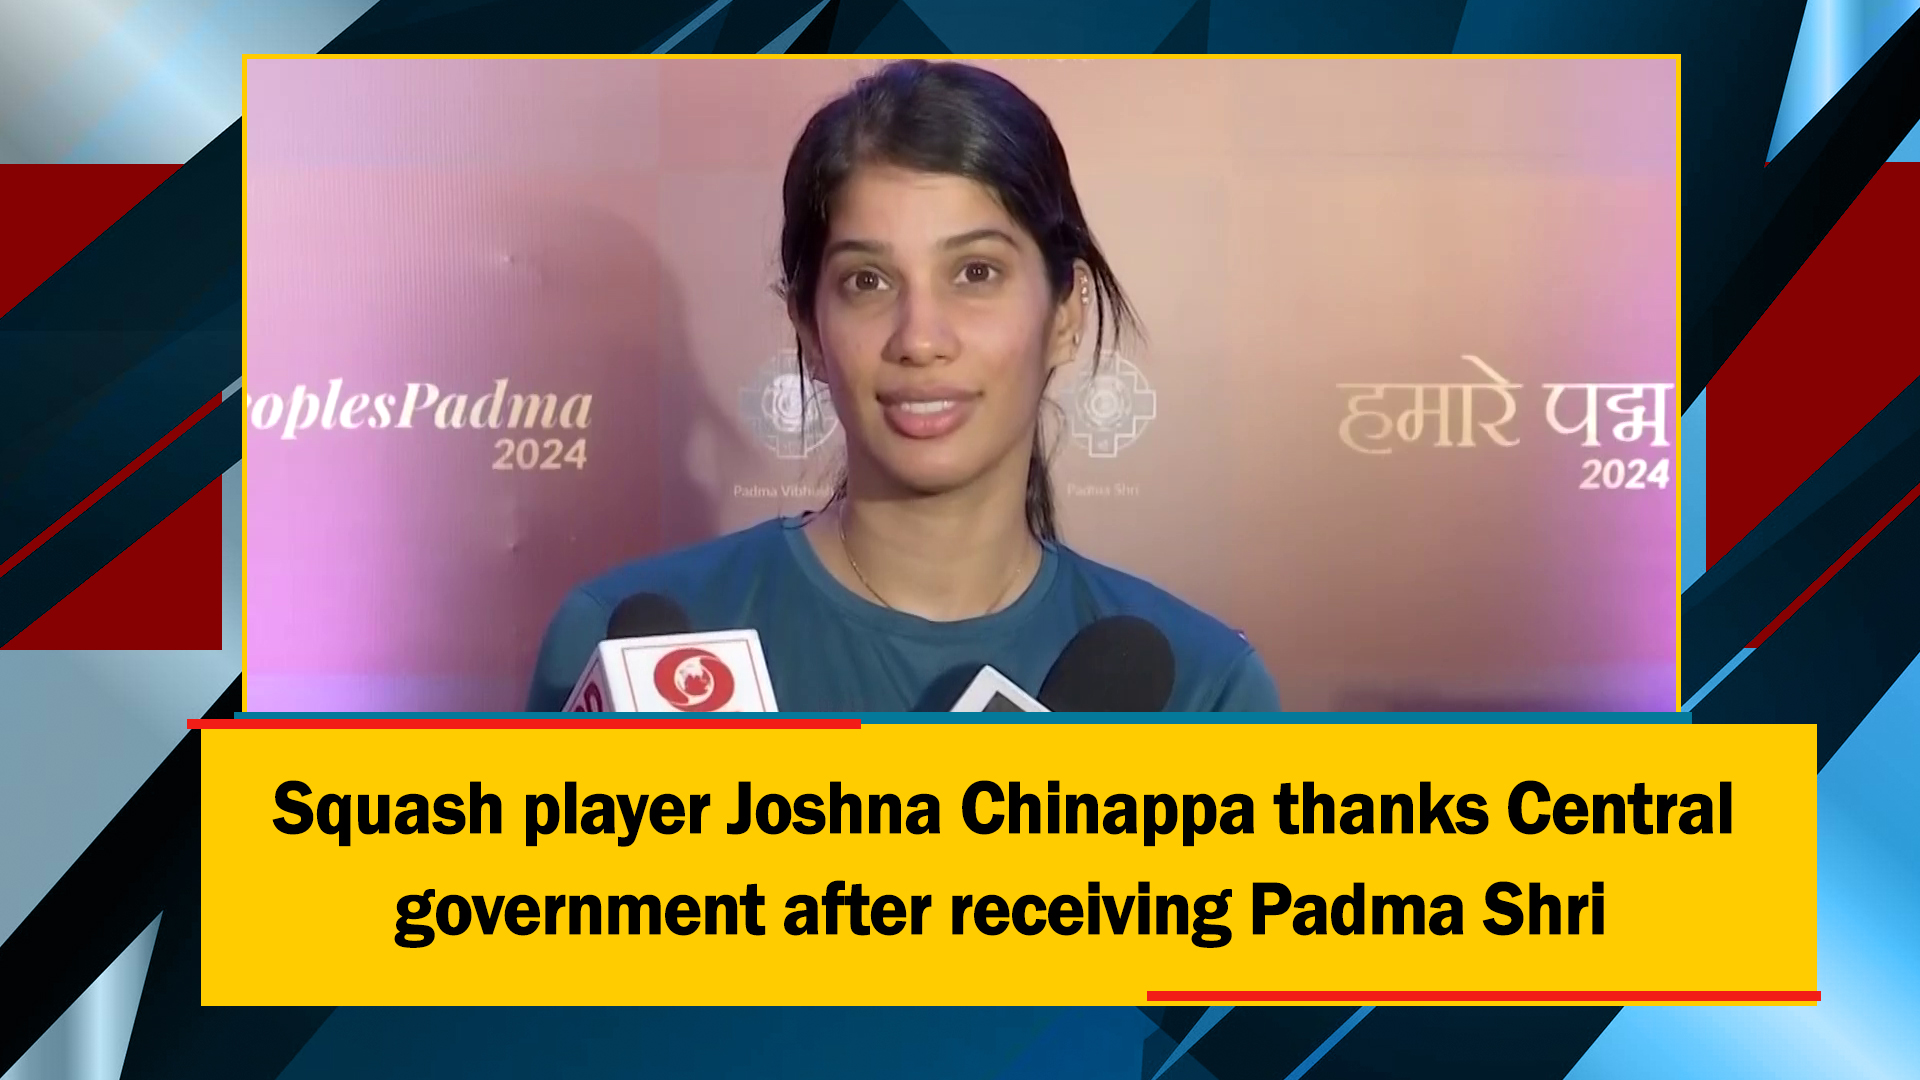 Squash player Joshna Chinappa thanks Central government after receiving Padma Shri